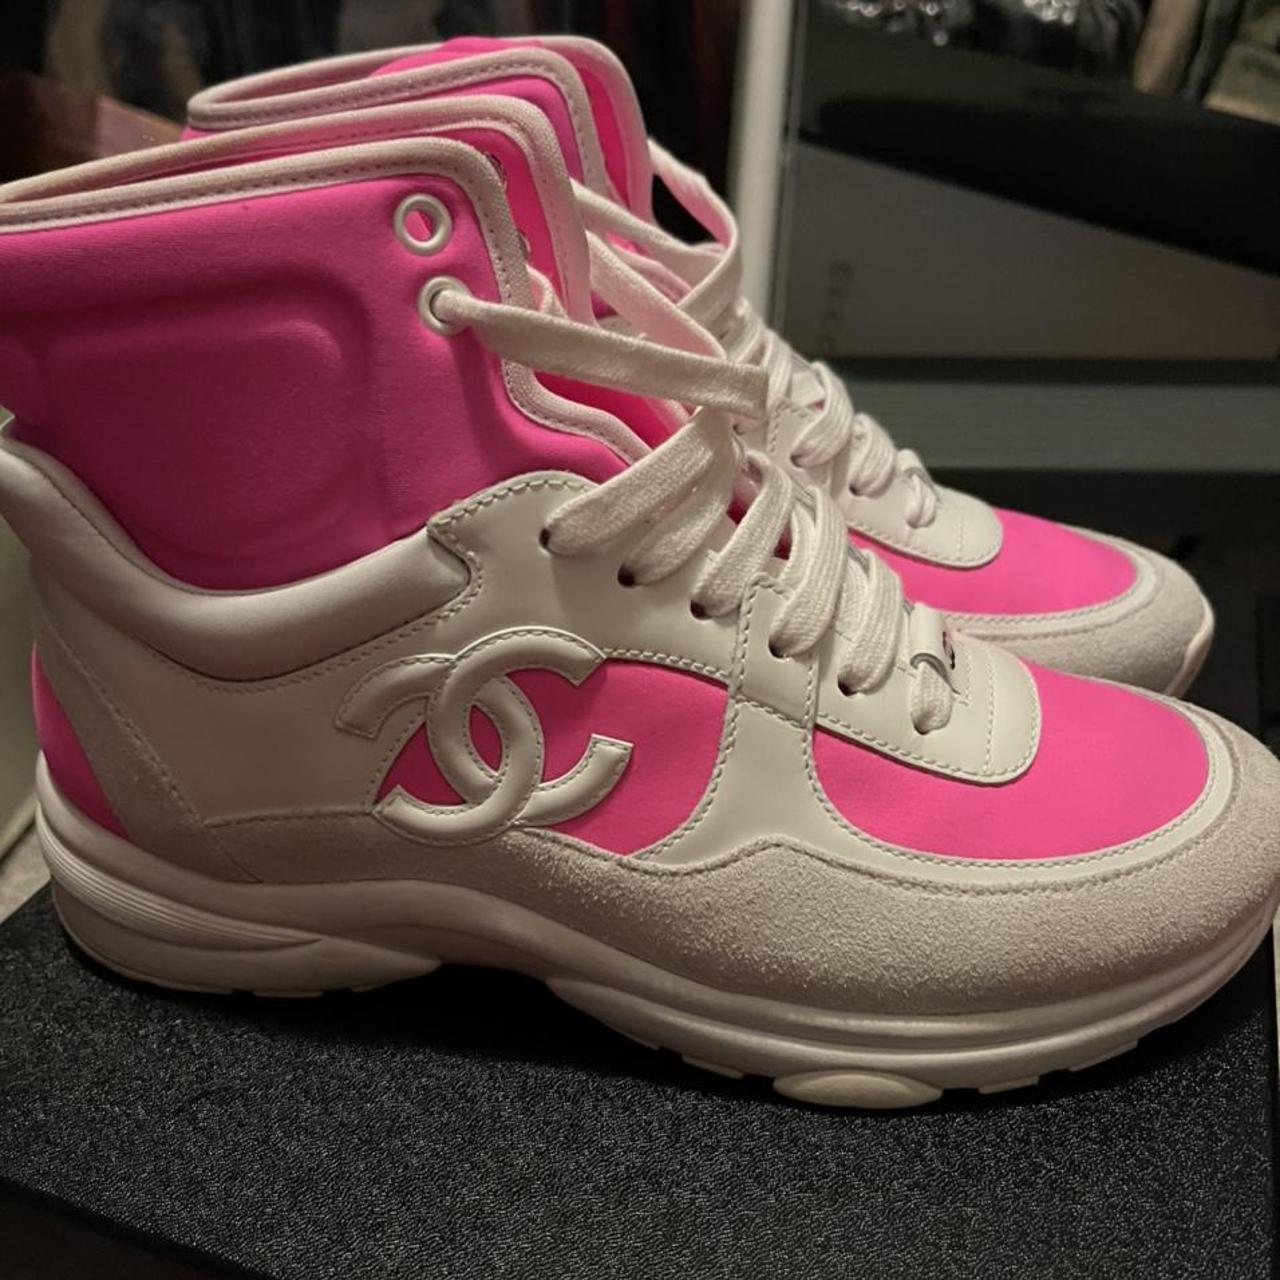 chanel high tops neon pink  Chanel sneakers, Sneakers, Sneakers nike